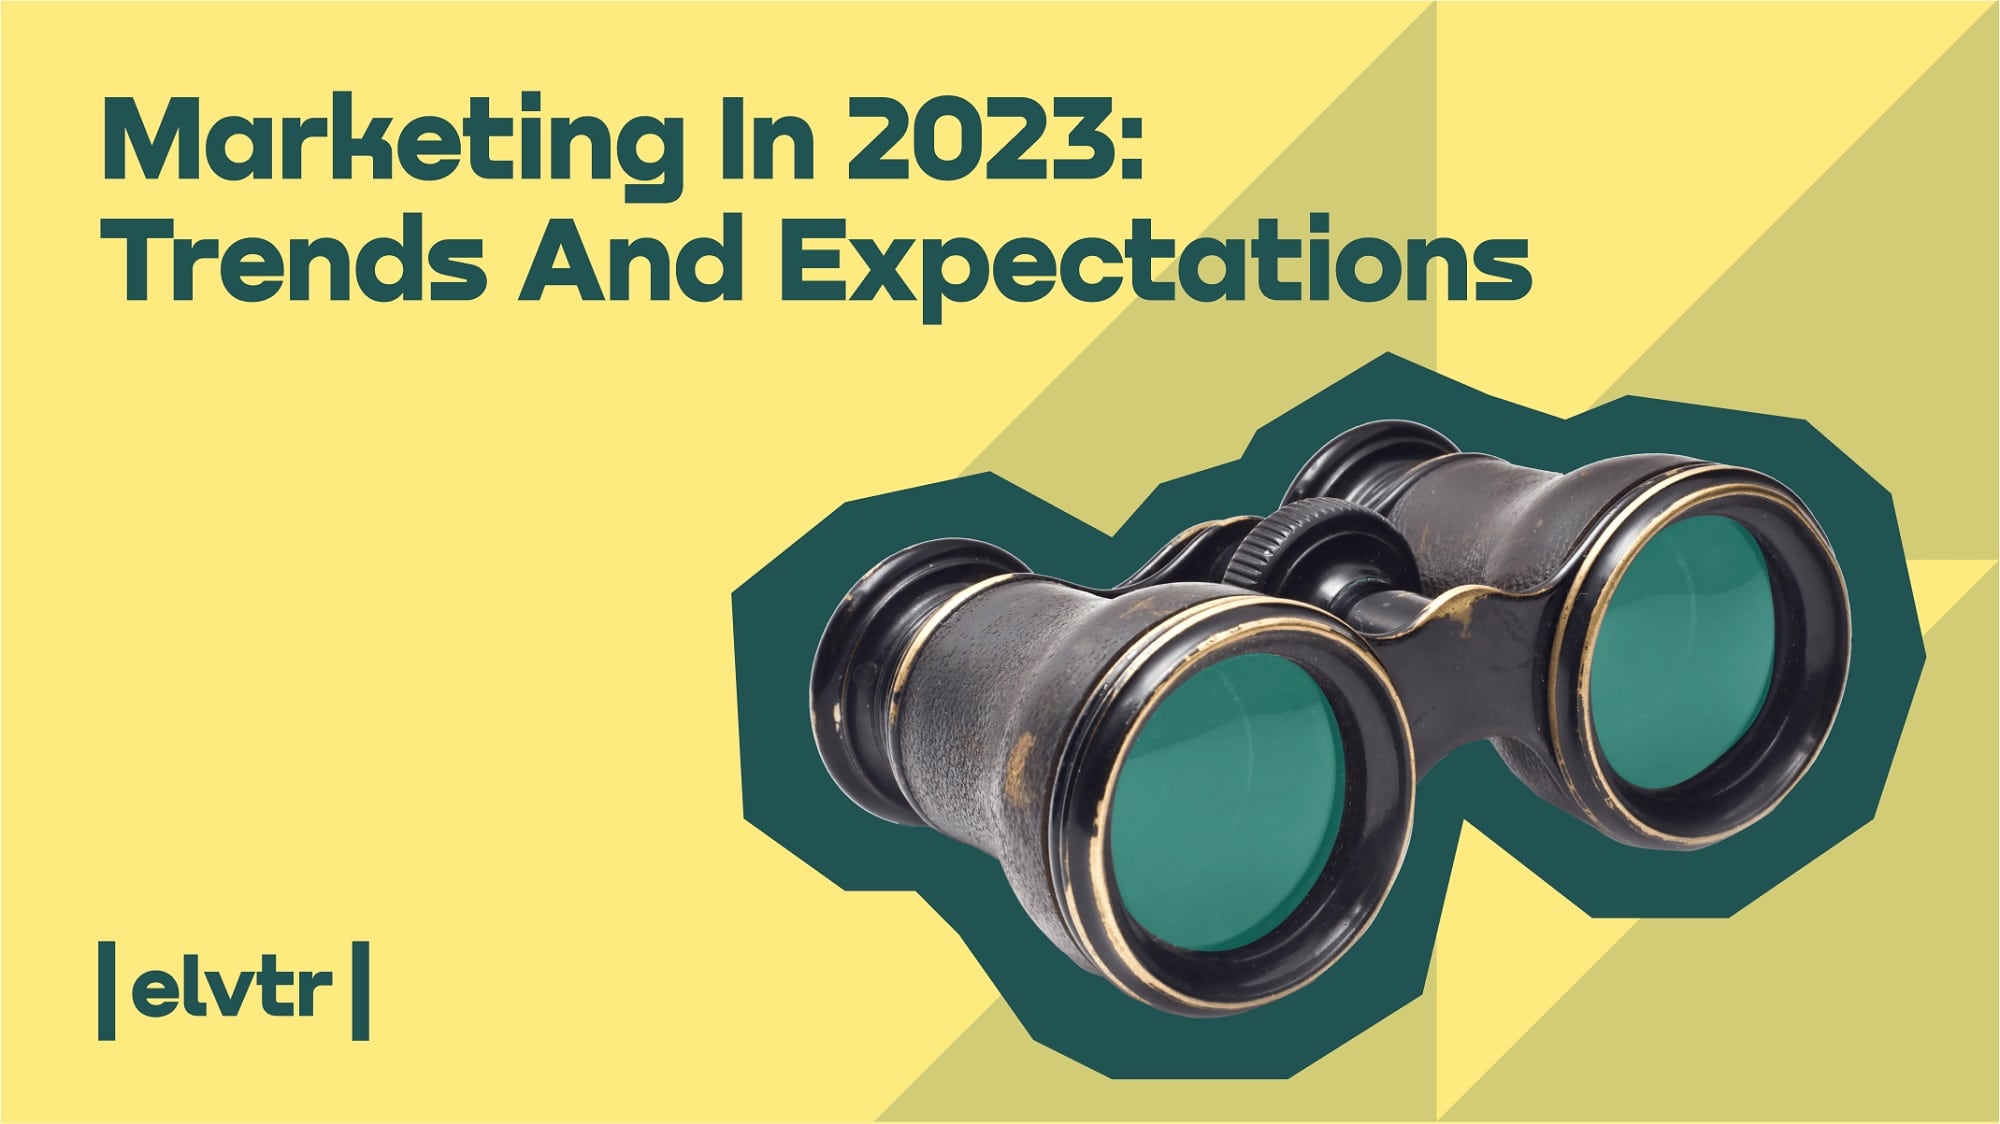 Marketing In 2023: Trends And Expectations image